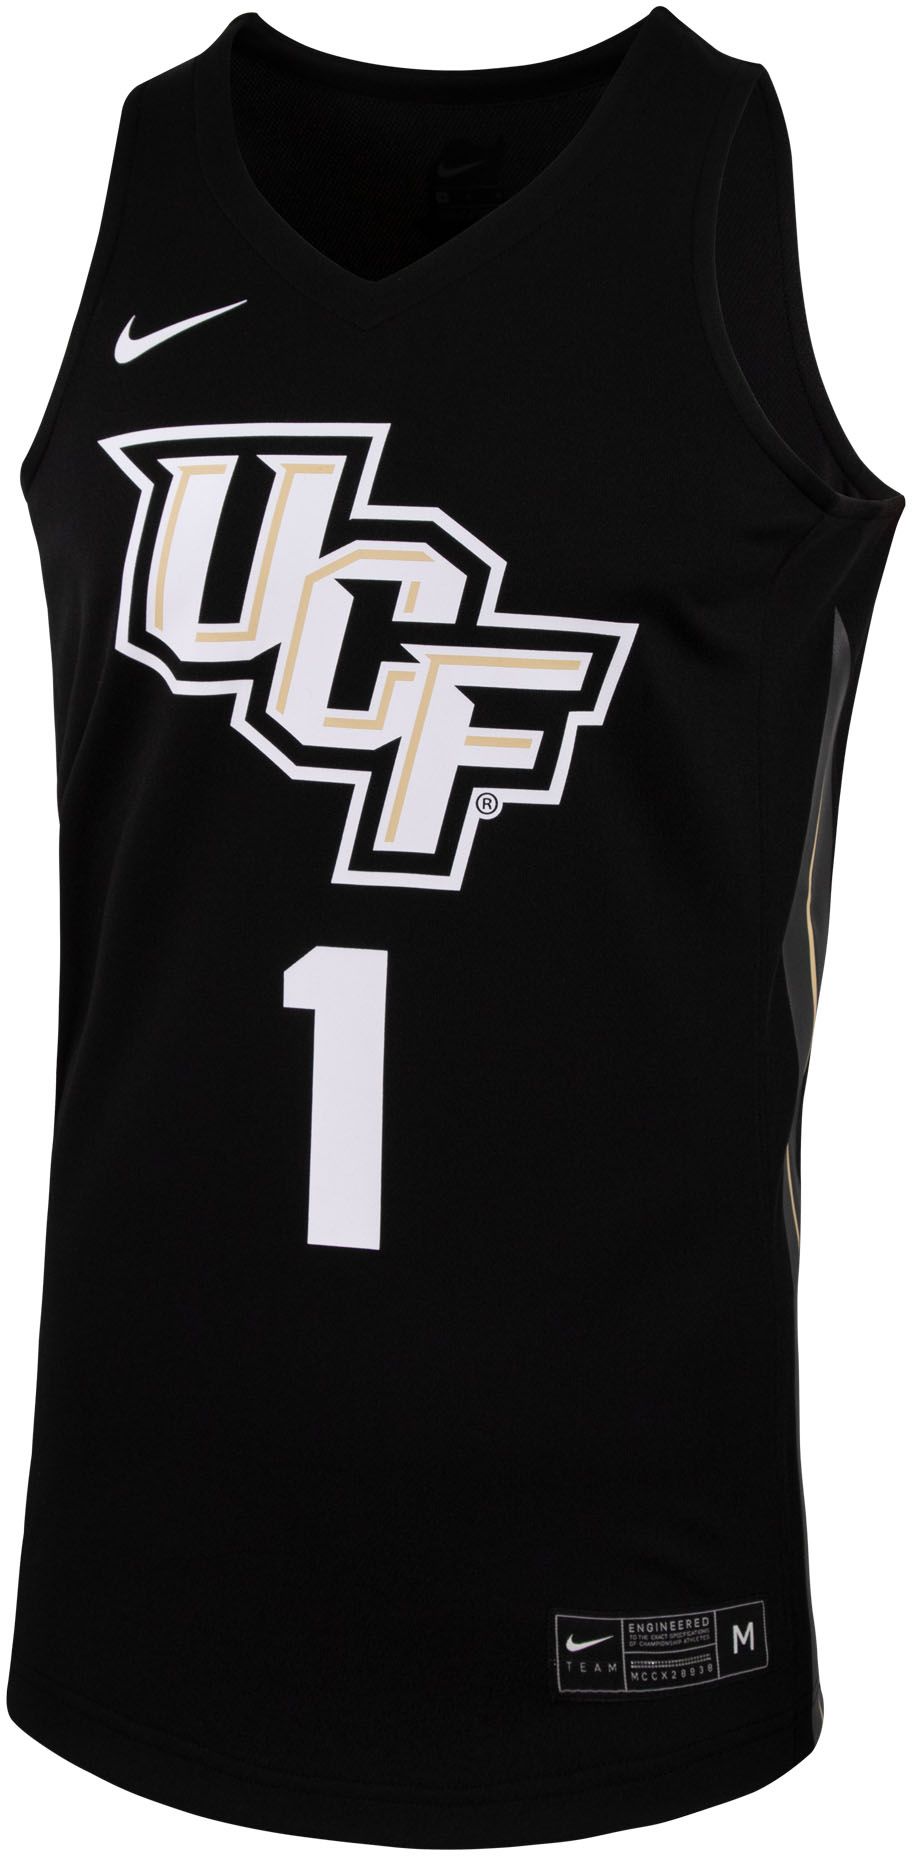 ucf basketball jersey for sale